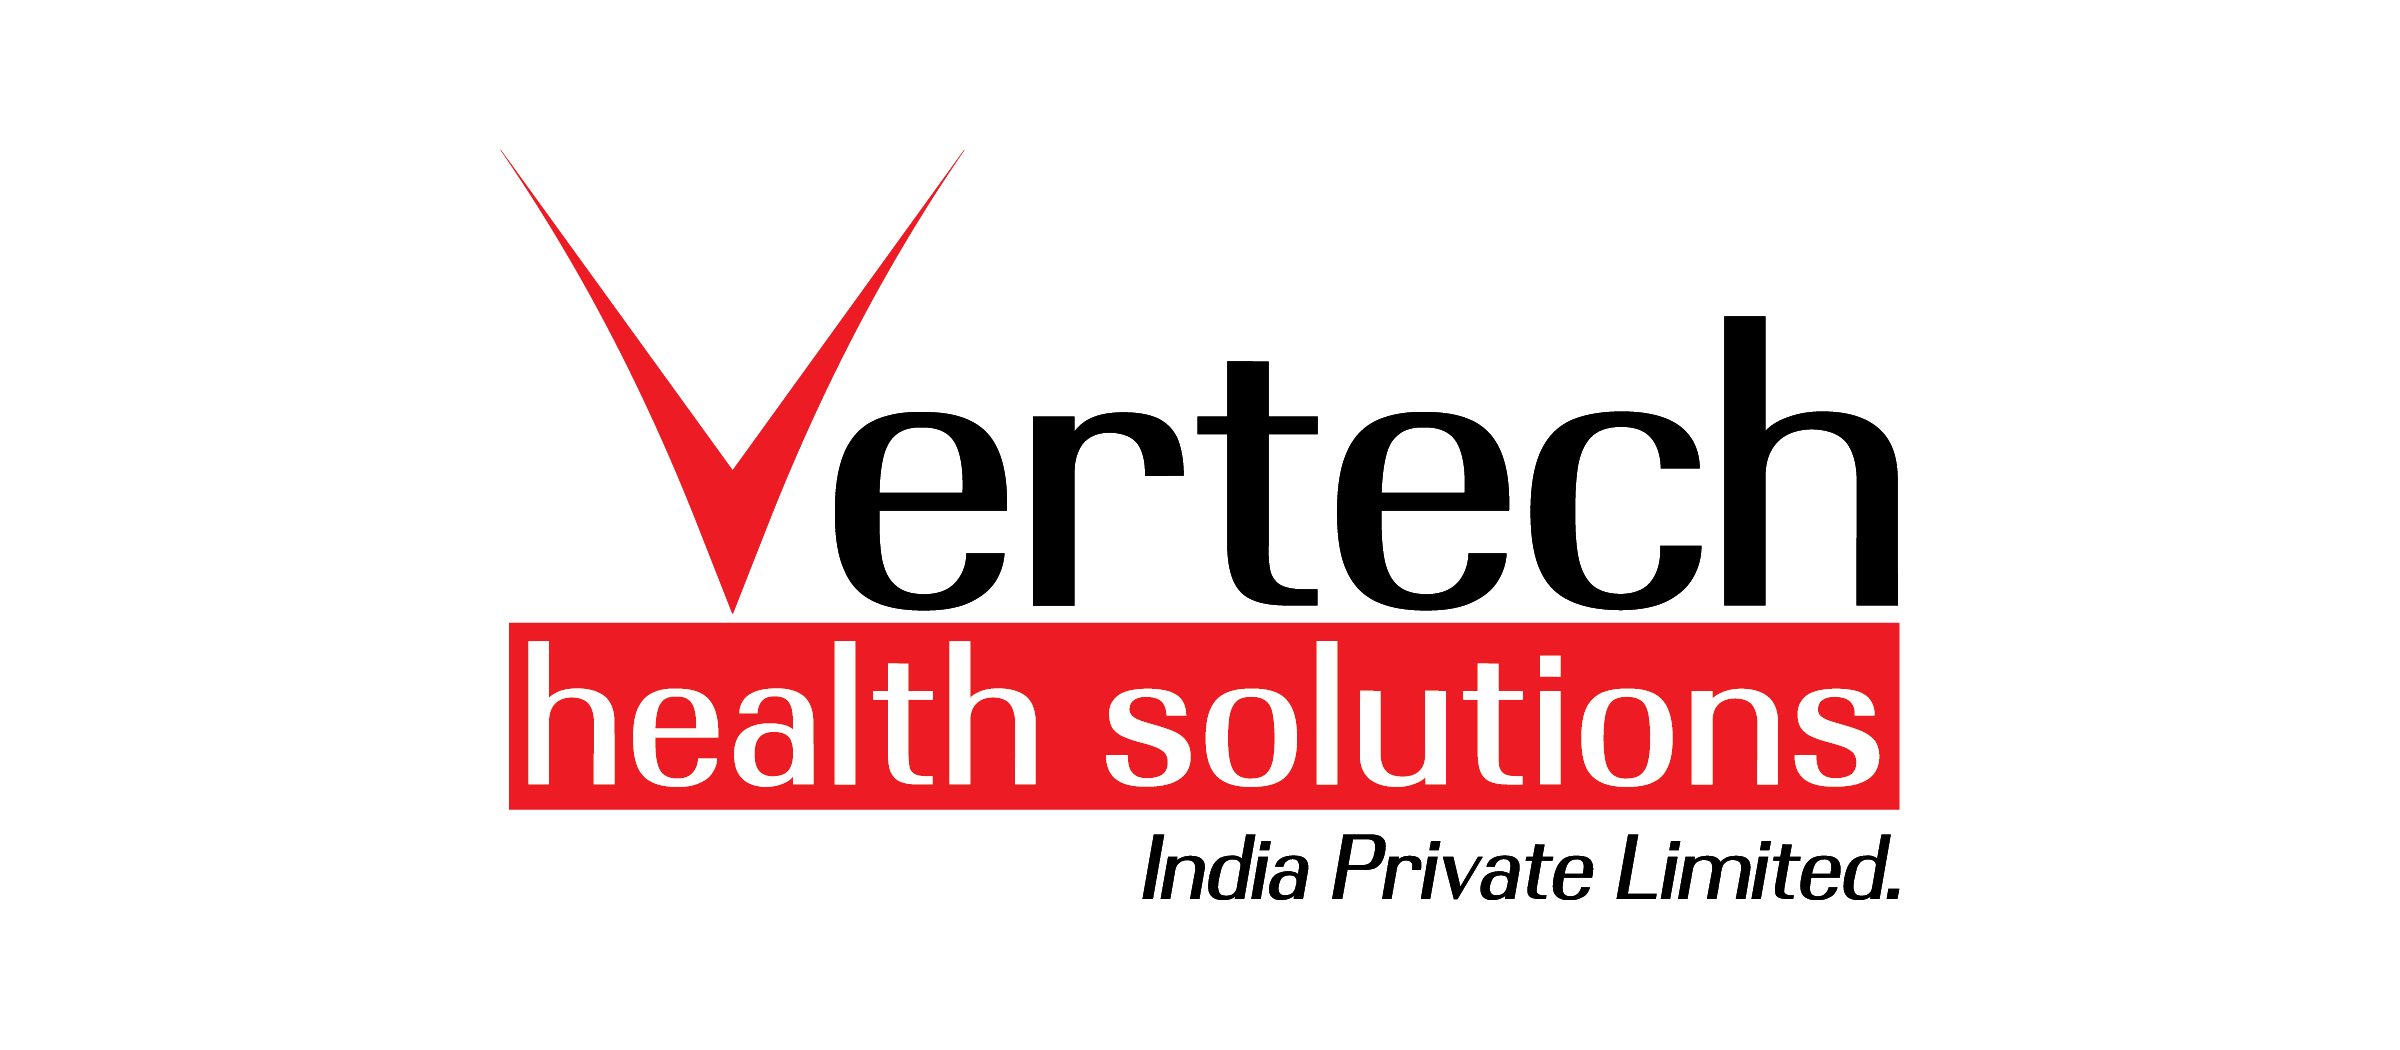 VERTECH HEALTH SOLUTIONS INDIA PRIVATE LIMITED